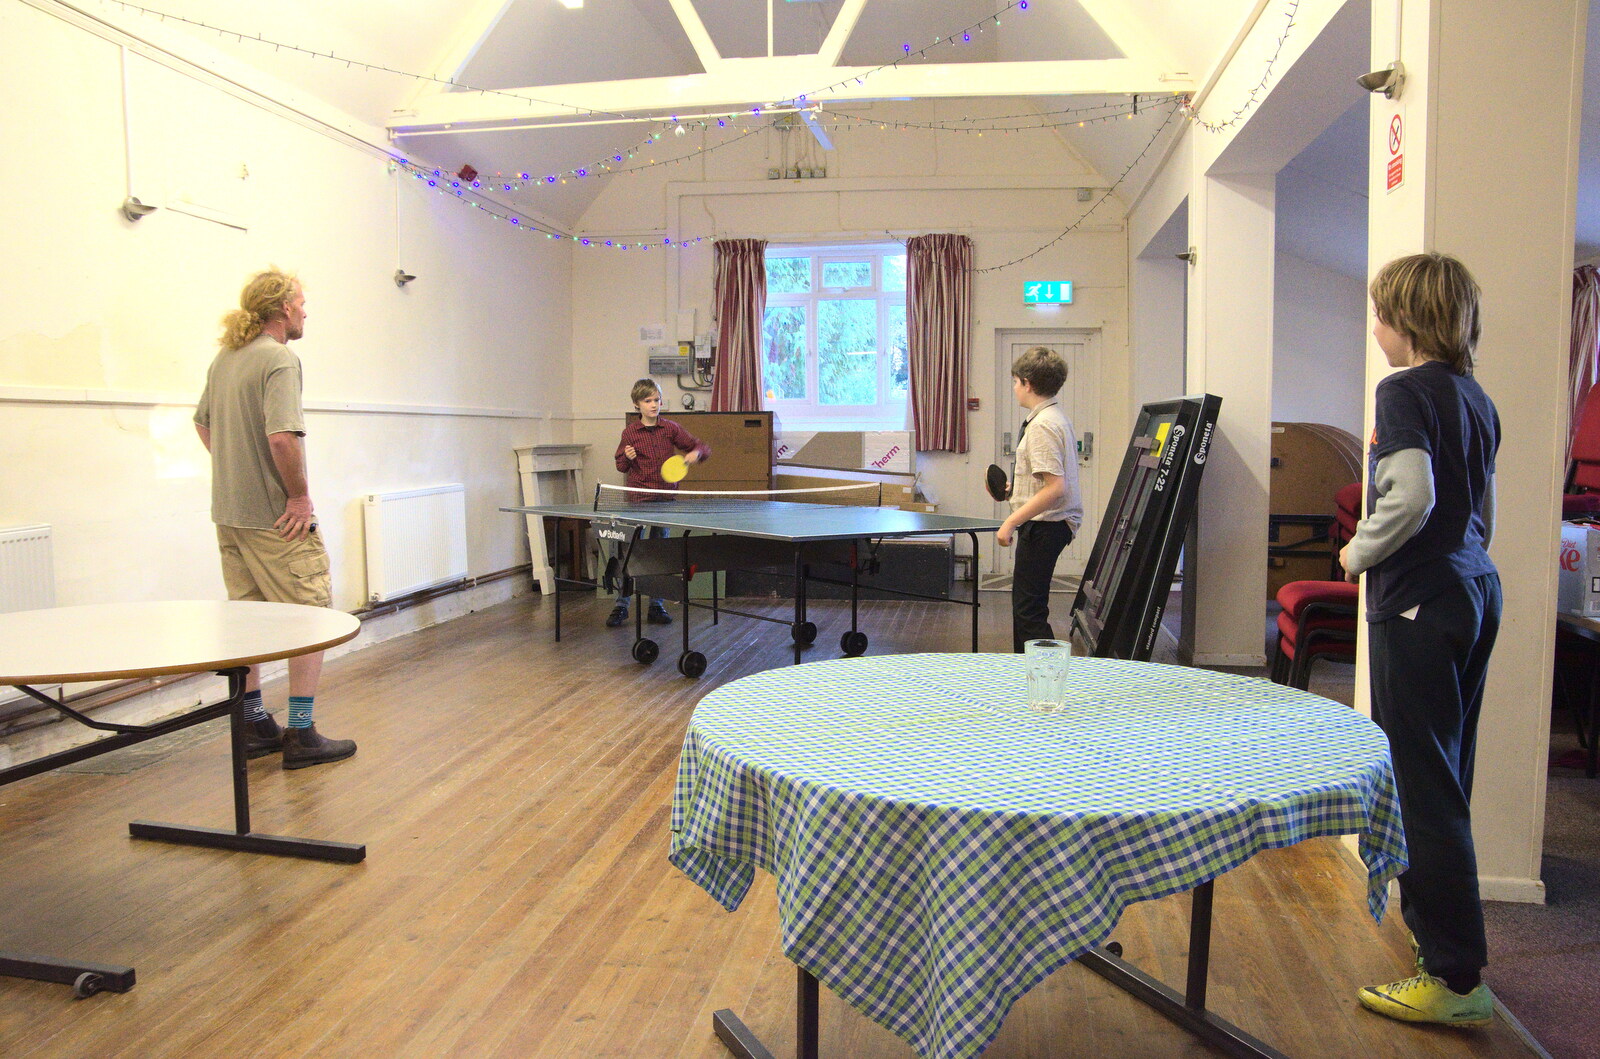 Grandad's Memorial Do, The Village Hall, Brome, Suffolk - 28th October 2022: Harry and Fred are playing table tennis